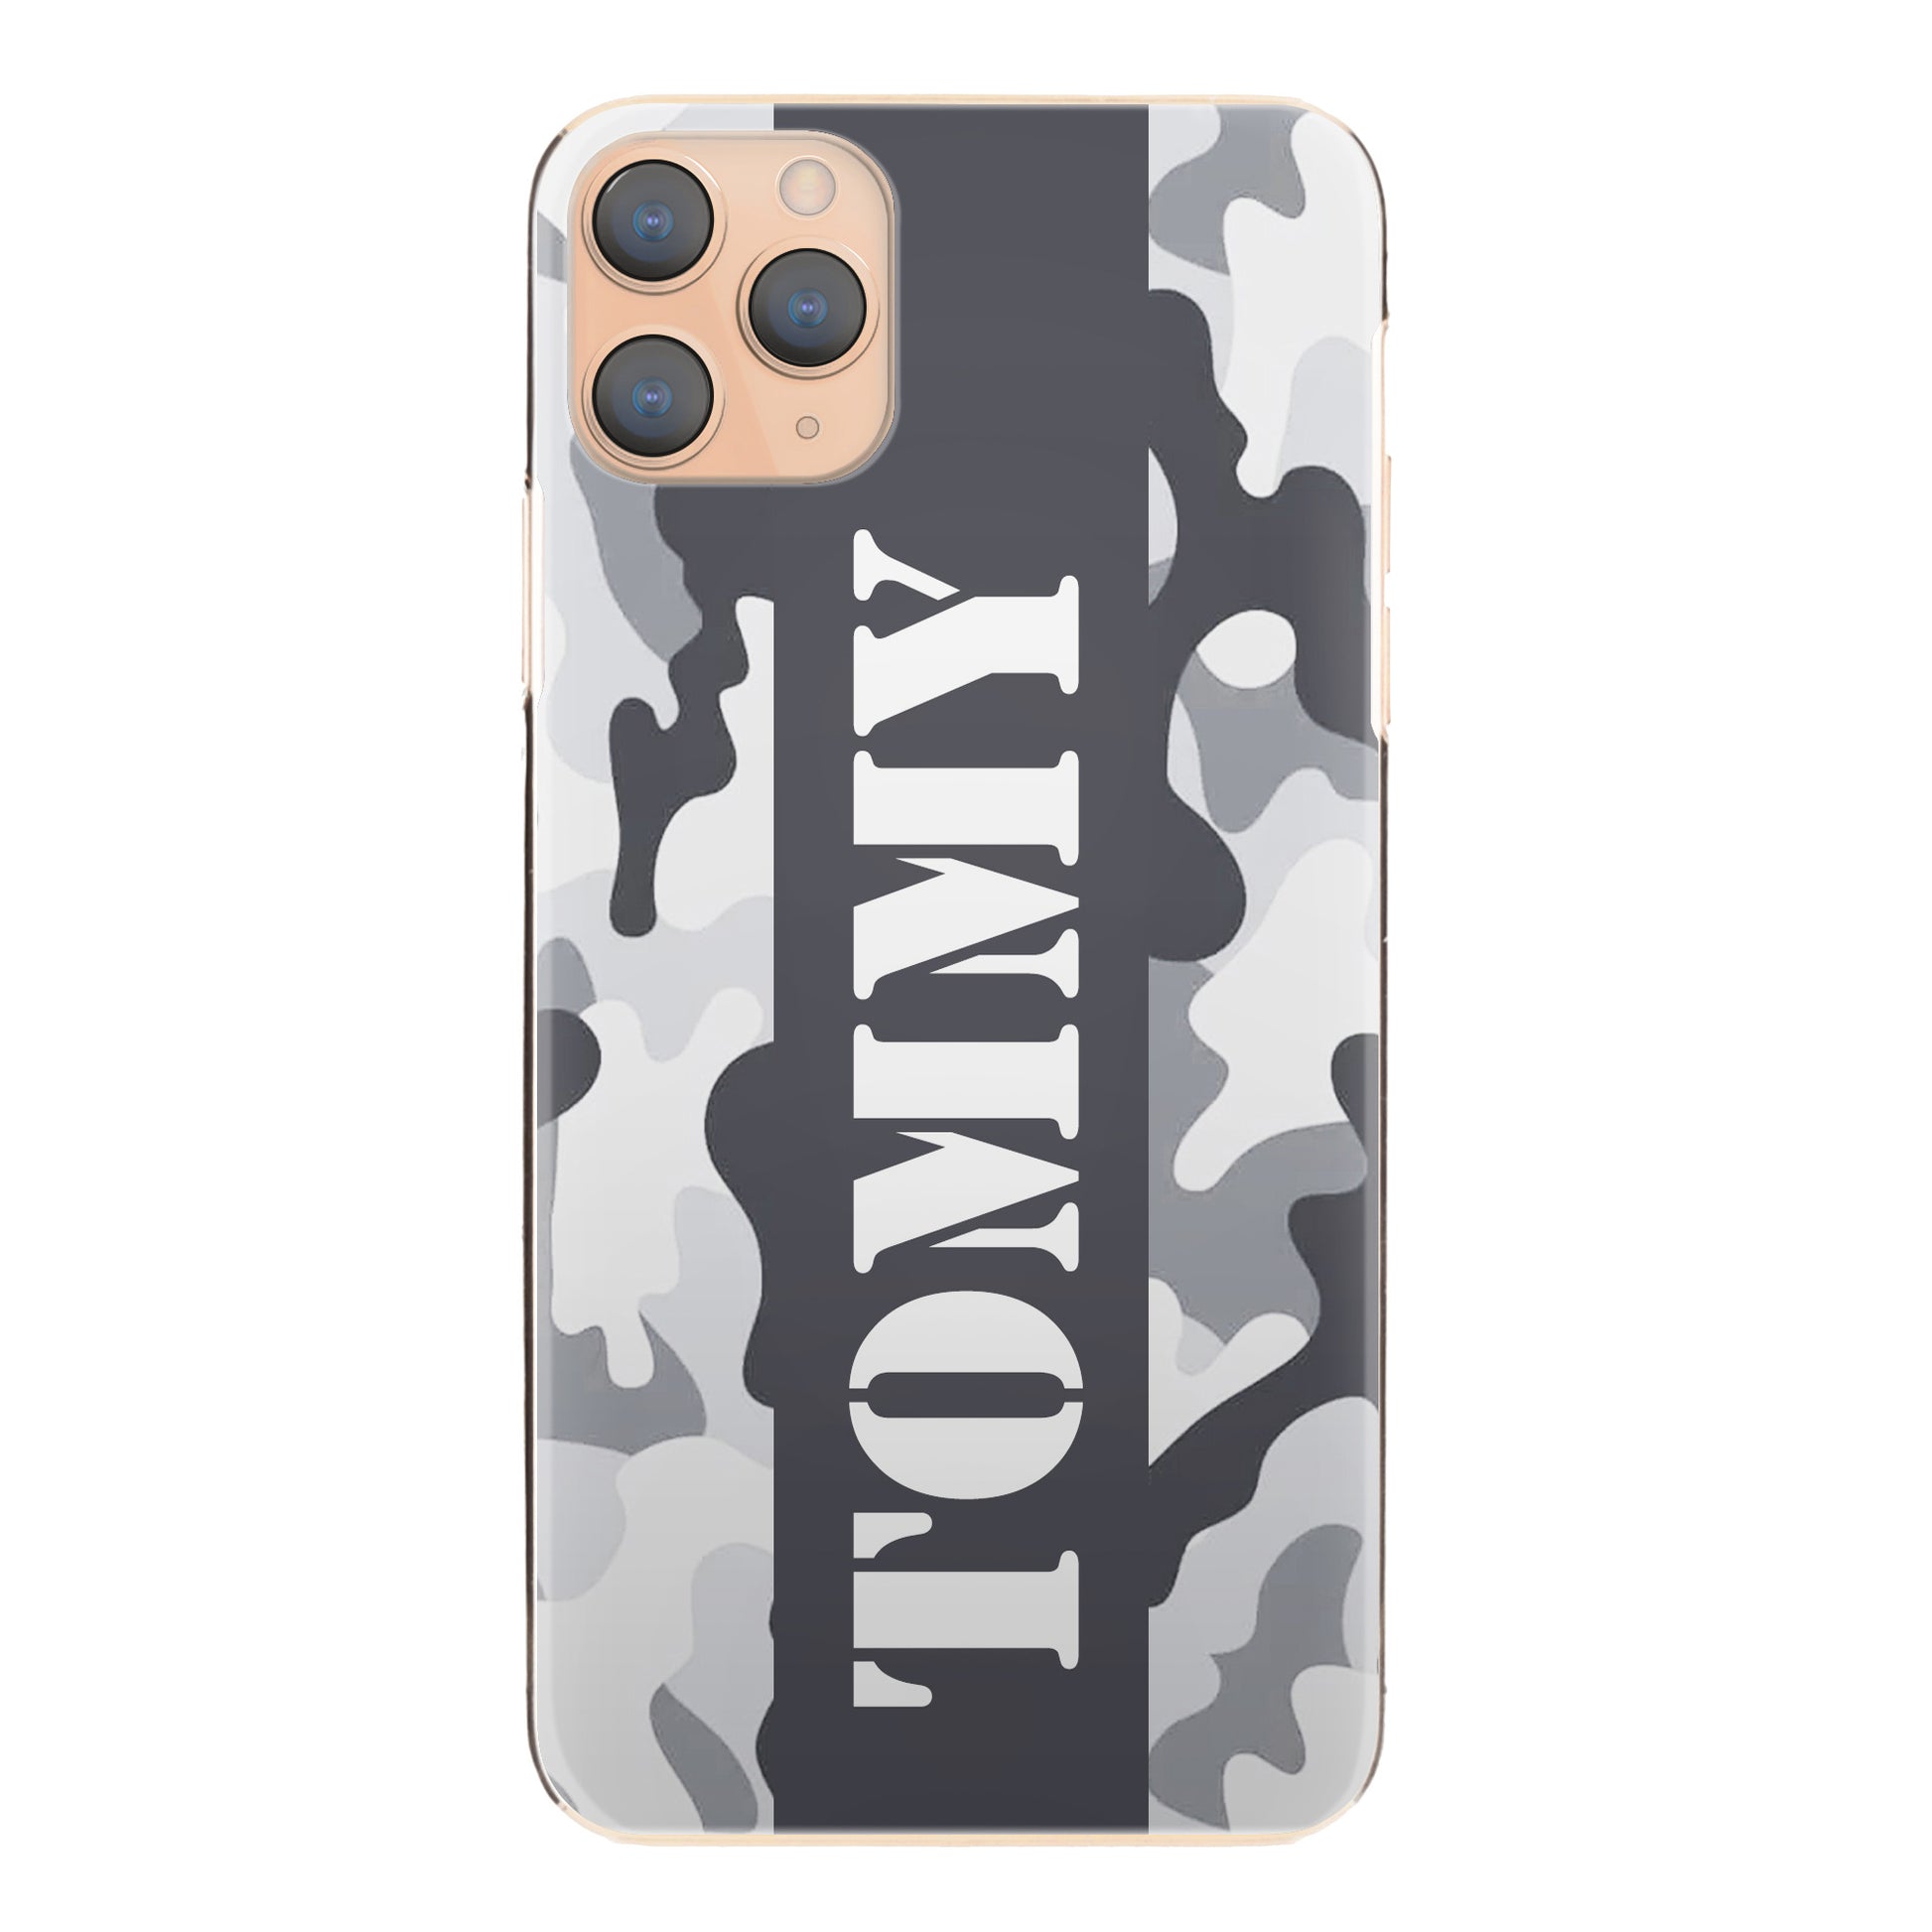 Personalised Huawei Phone Hard Case with Military Text on Artic Camo